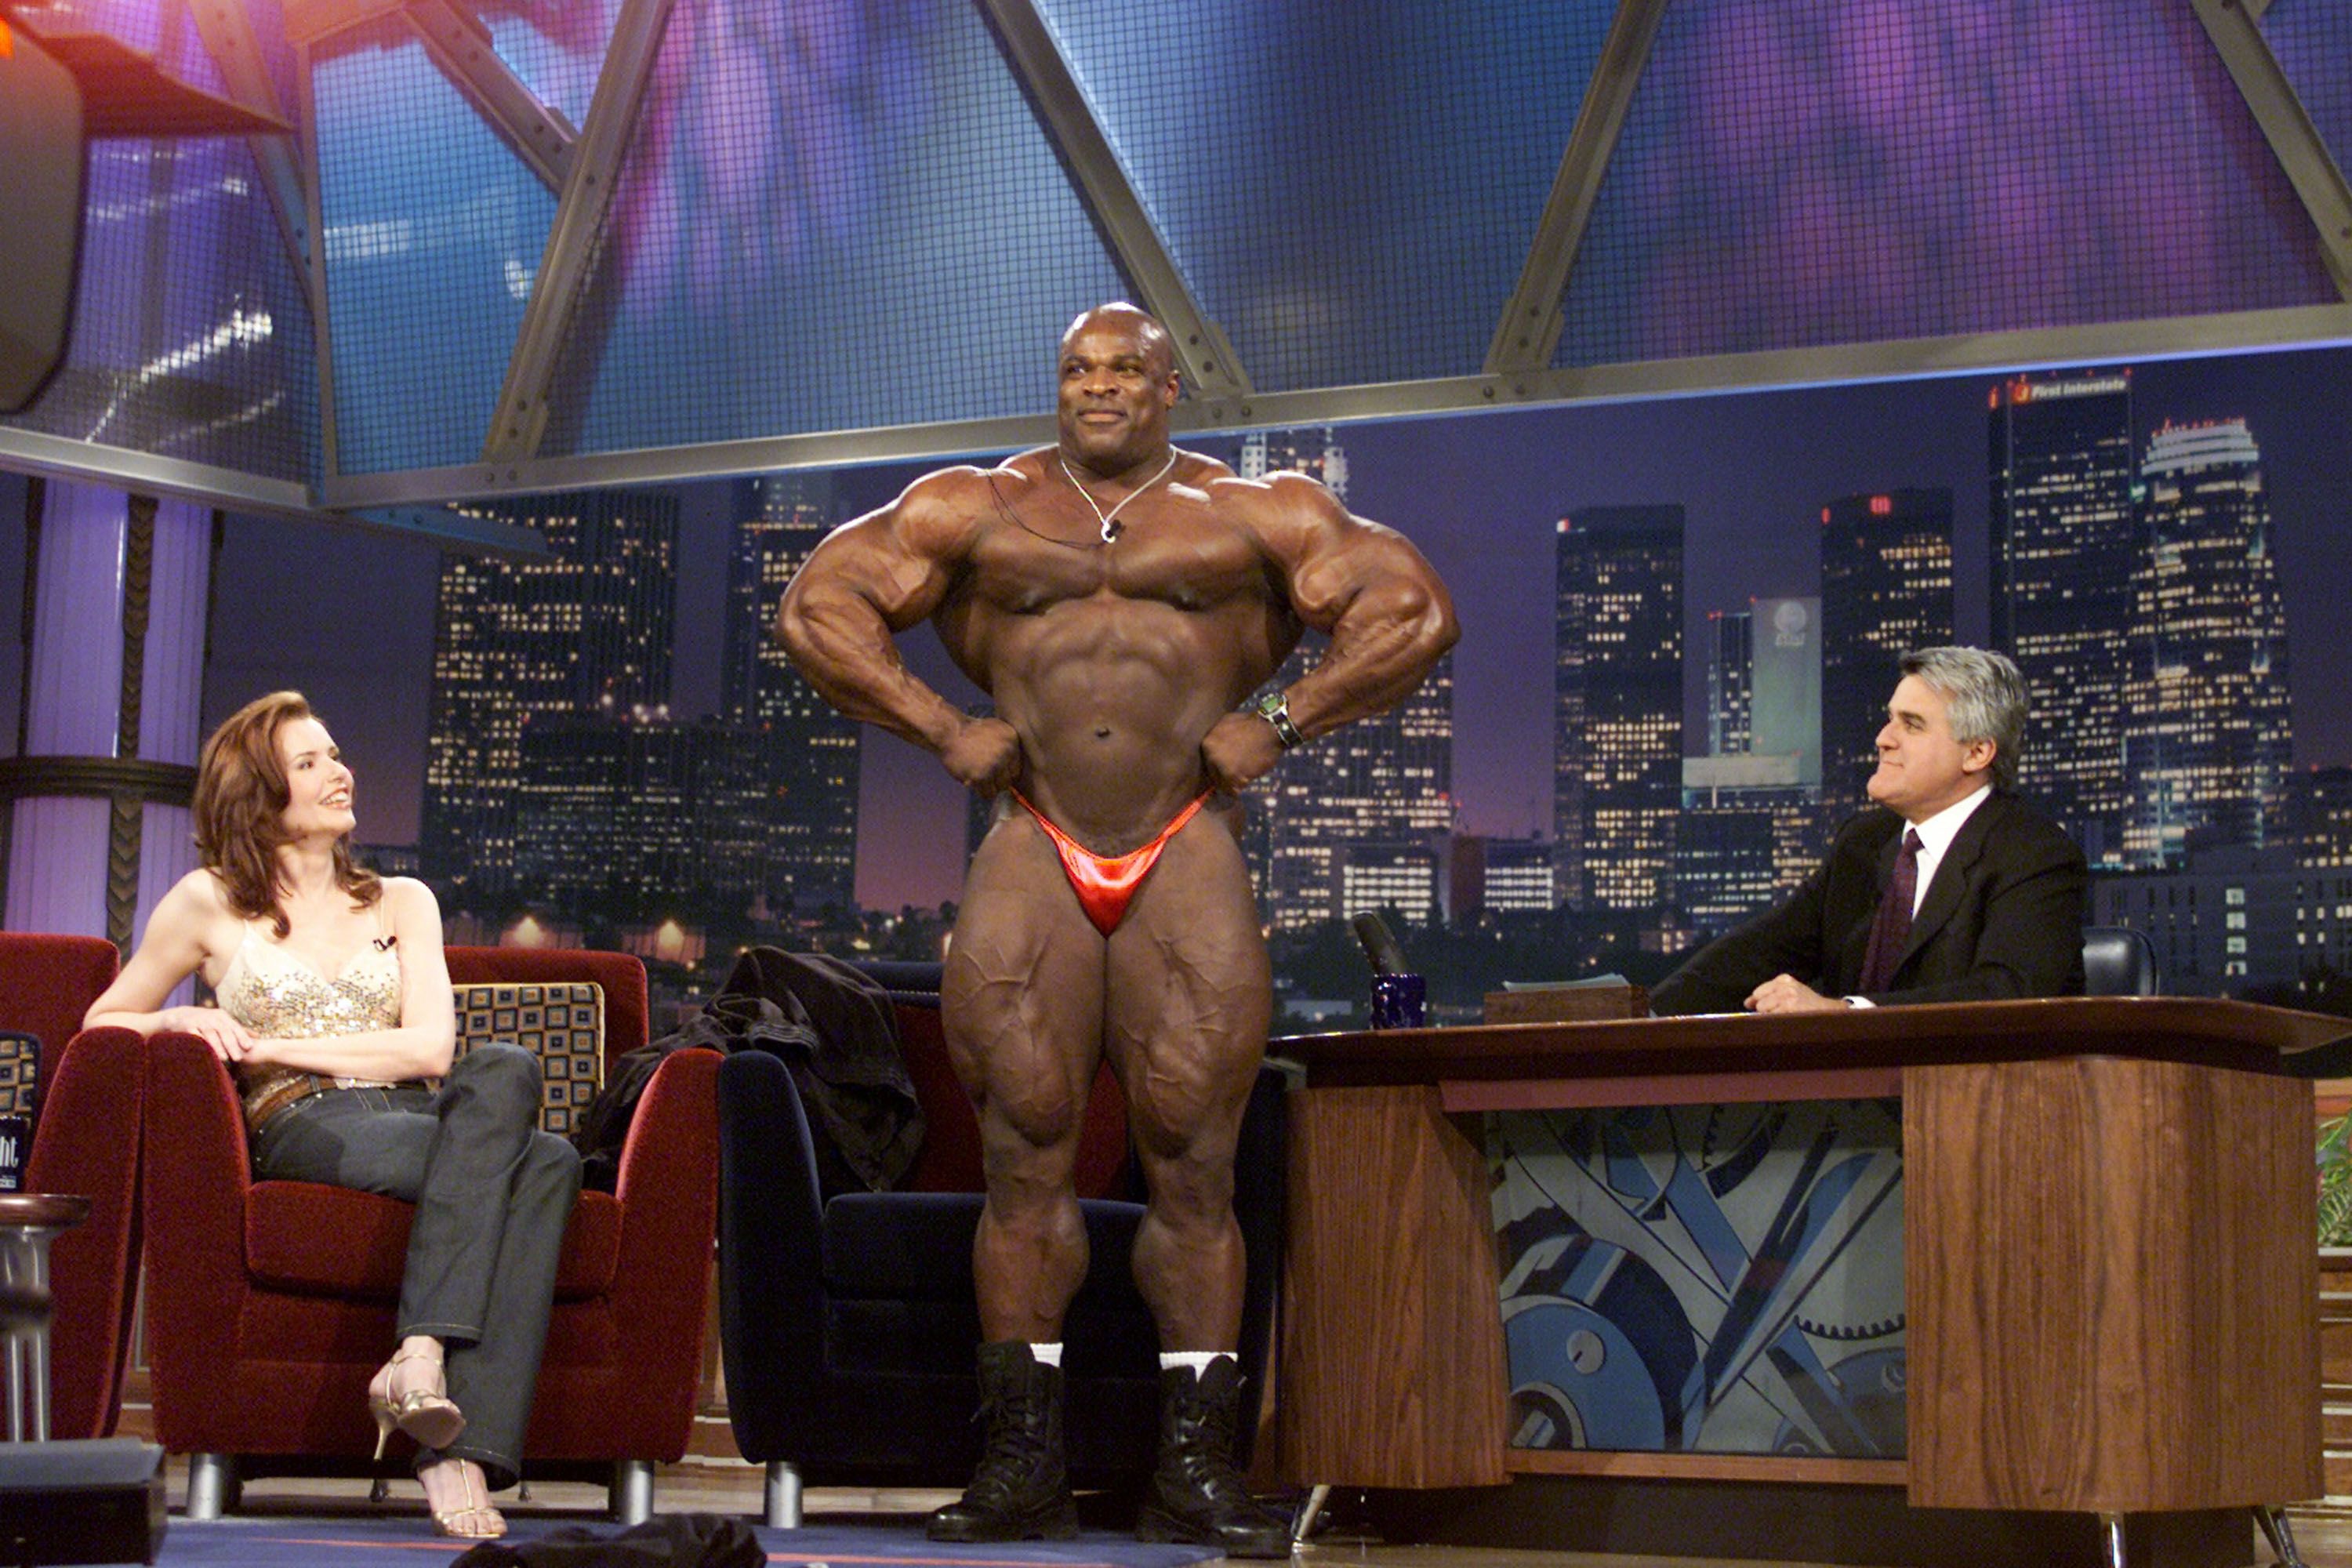 Joe Rogan Experience Features Ronnie Coleman on Steroid Usage